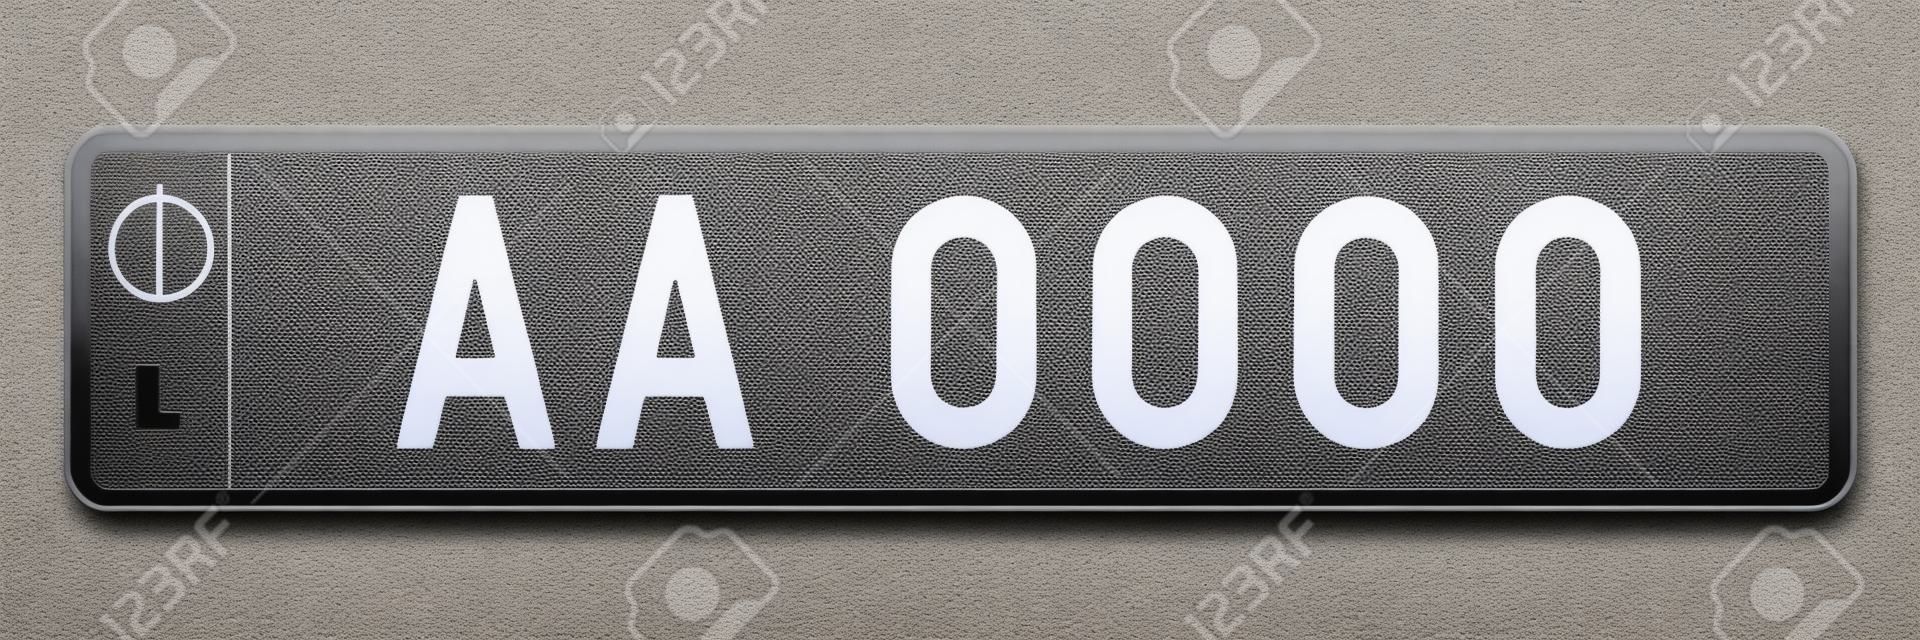 Number plate. Vehicle registration plates of Luxembourg